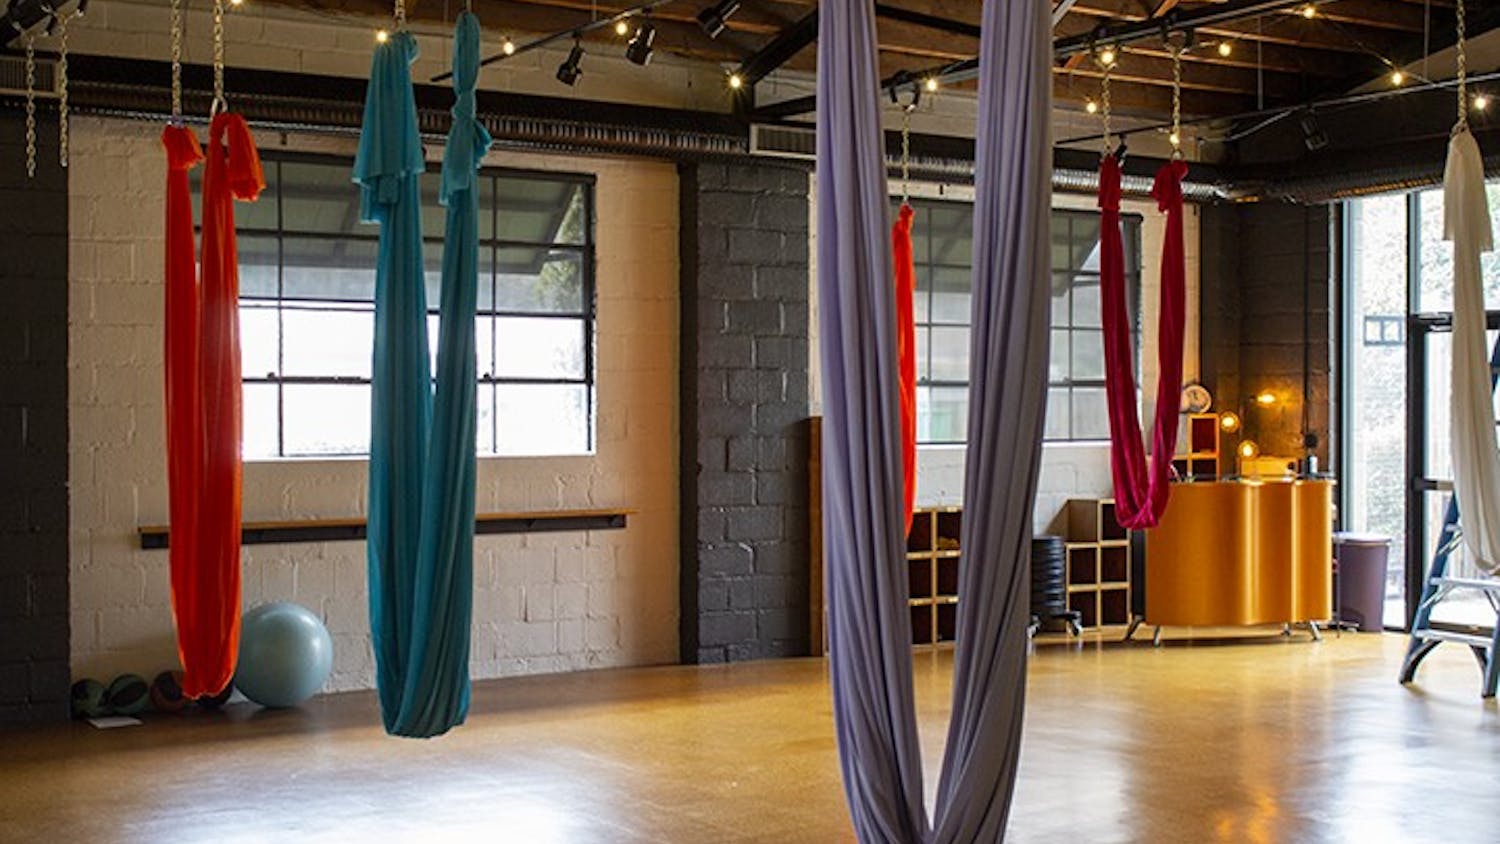 Fit Columbia, located at 2121 College St., is known for its aerial yoga, with colorful silks hanging from the ceiling that help customers soar into the air effortlessly.